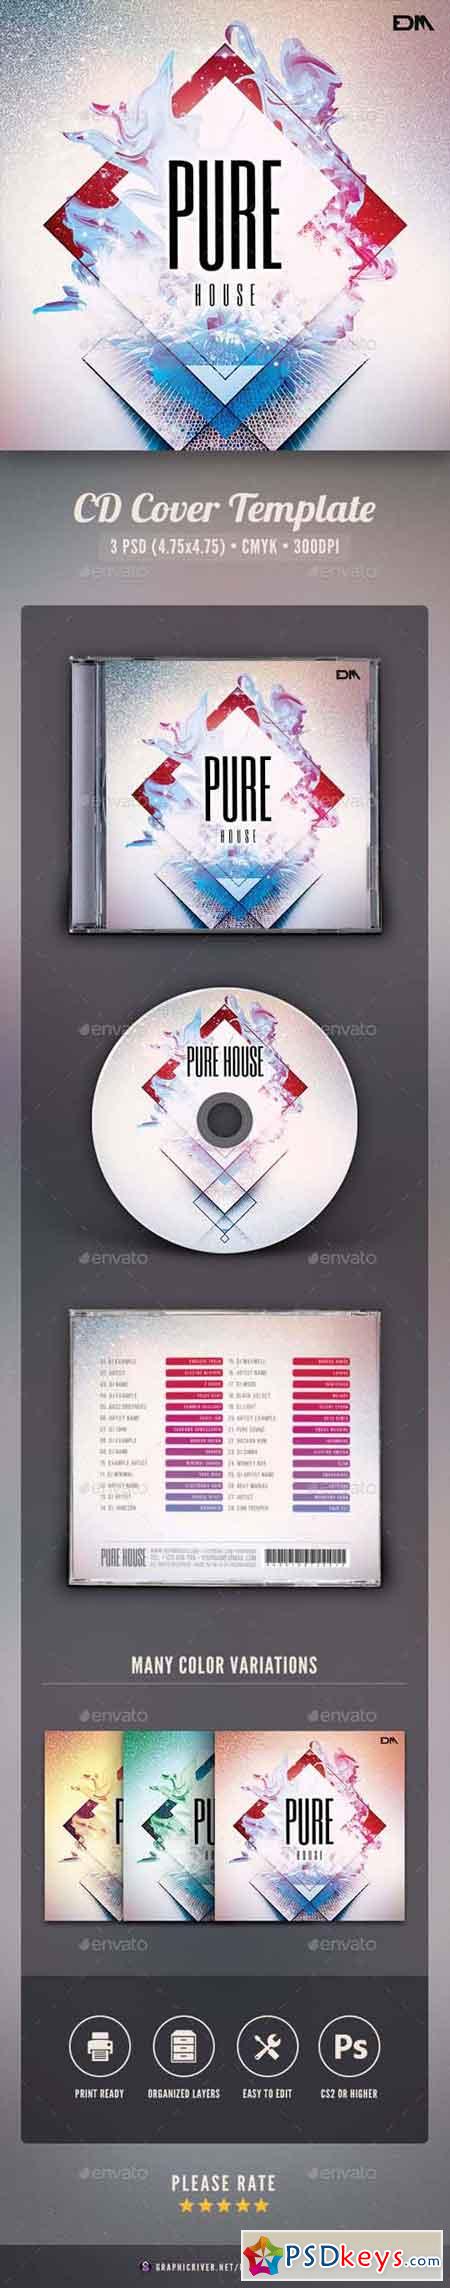 Pure House CD Cover Artwork 16042133